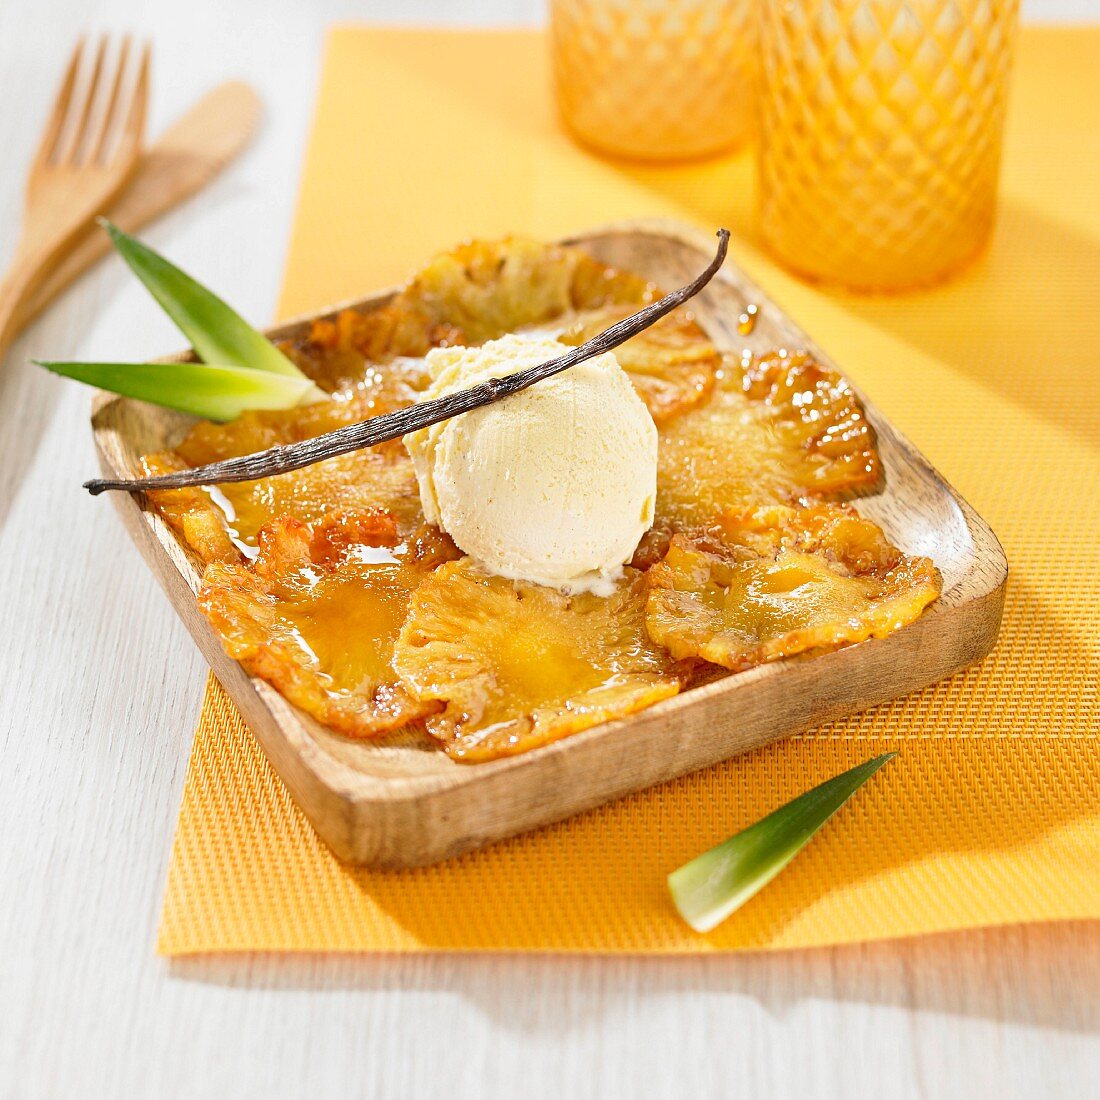 Thin slices of caramelized pineapple and a scoop of vanilla ice cream